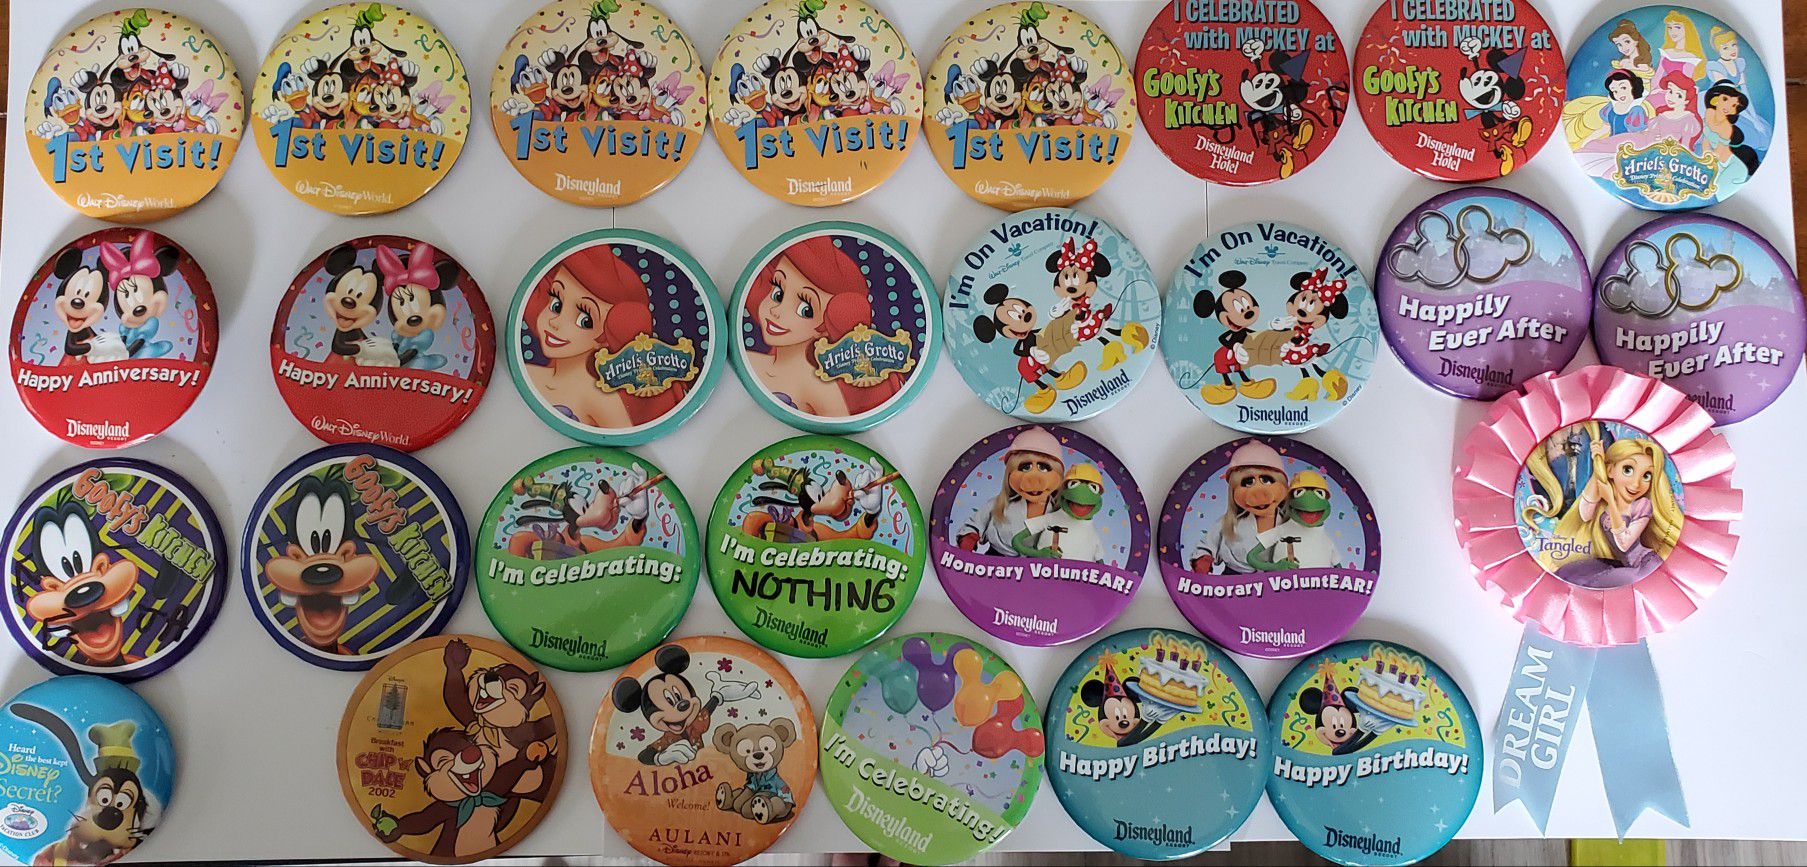 39 Disney and Disneyland buttons